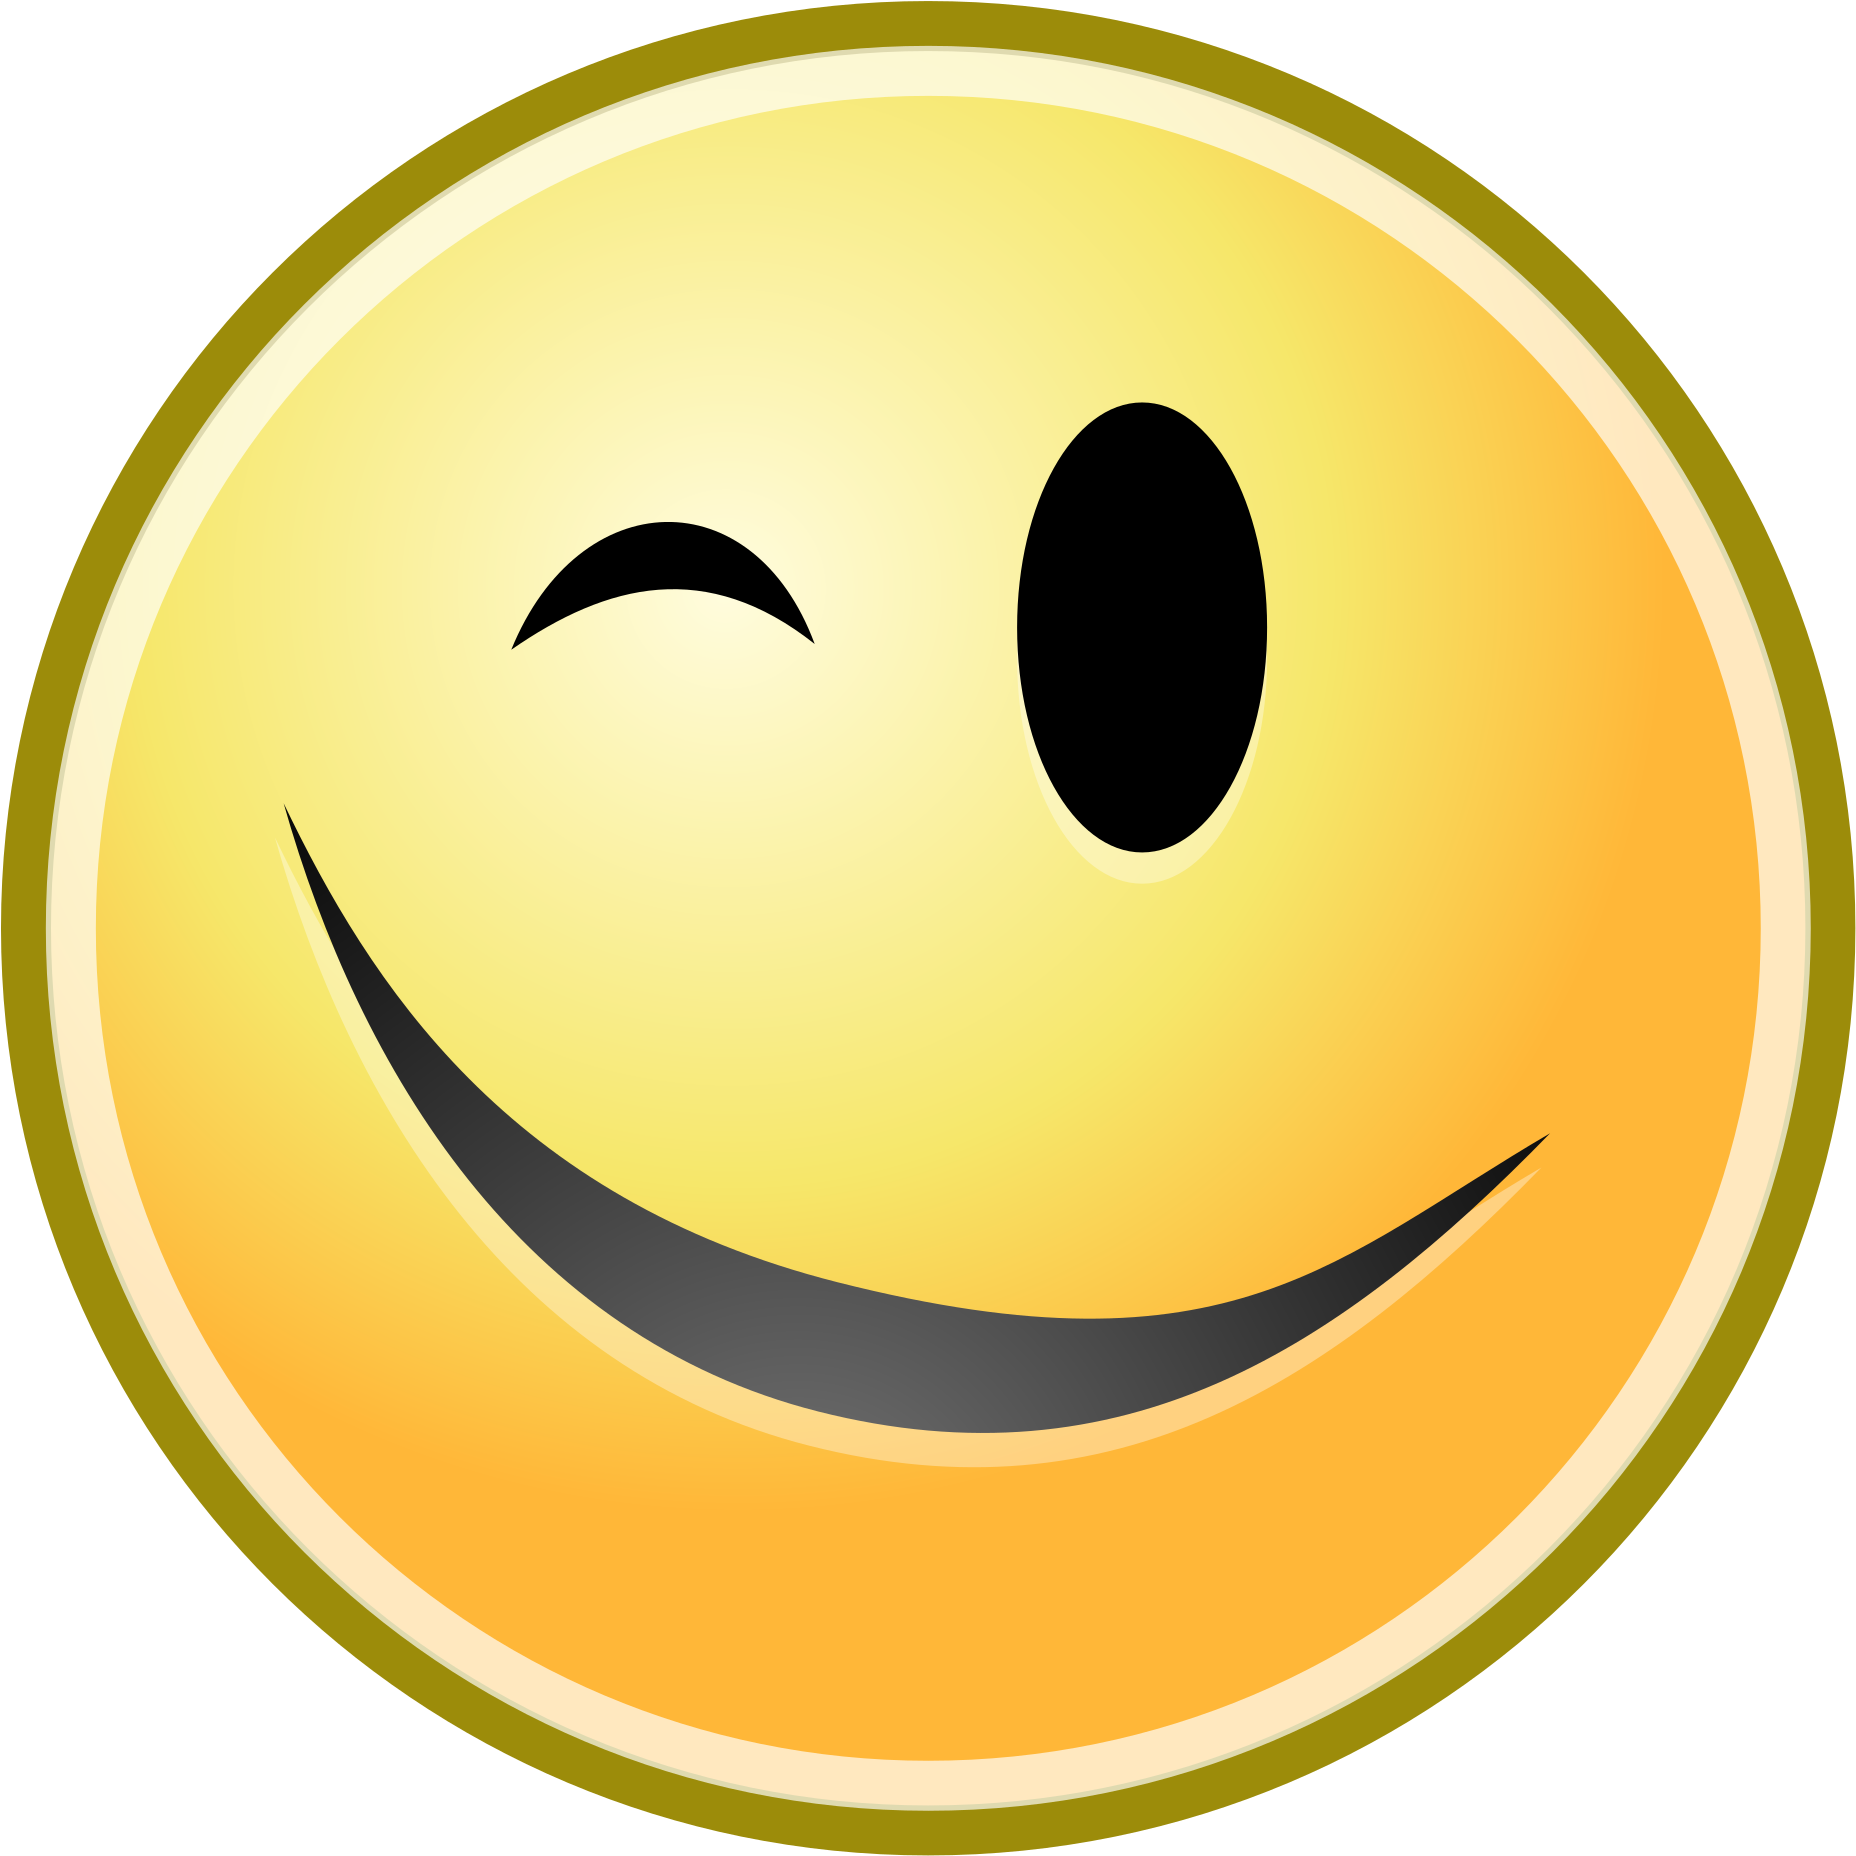 Wink Smiley Yellow Smiley Face 2400x2400 Png Clipart Download